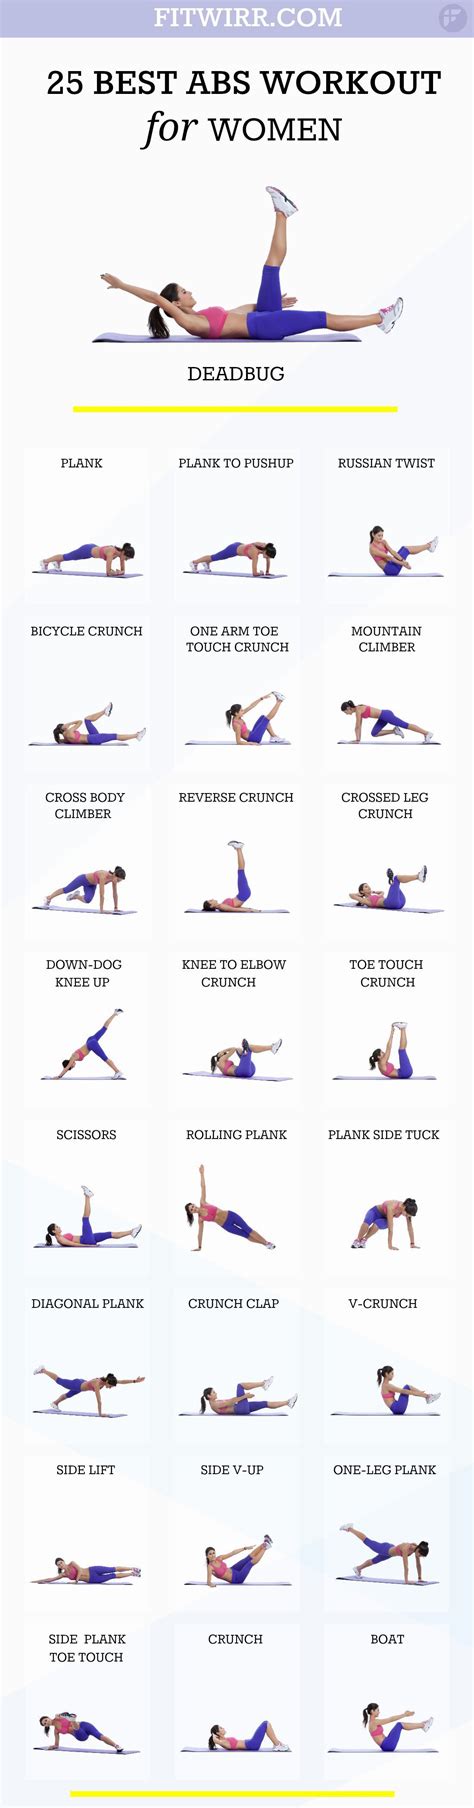 Flat Abs Workout Challenges â Best Abs Infographics Abs workout Abs workout for women Best